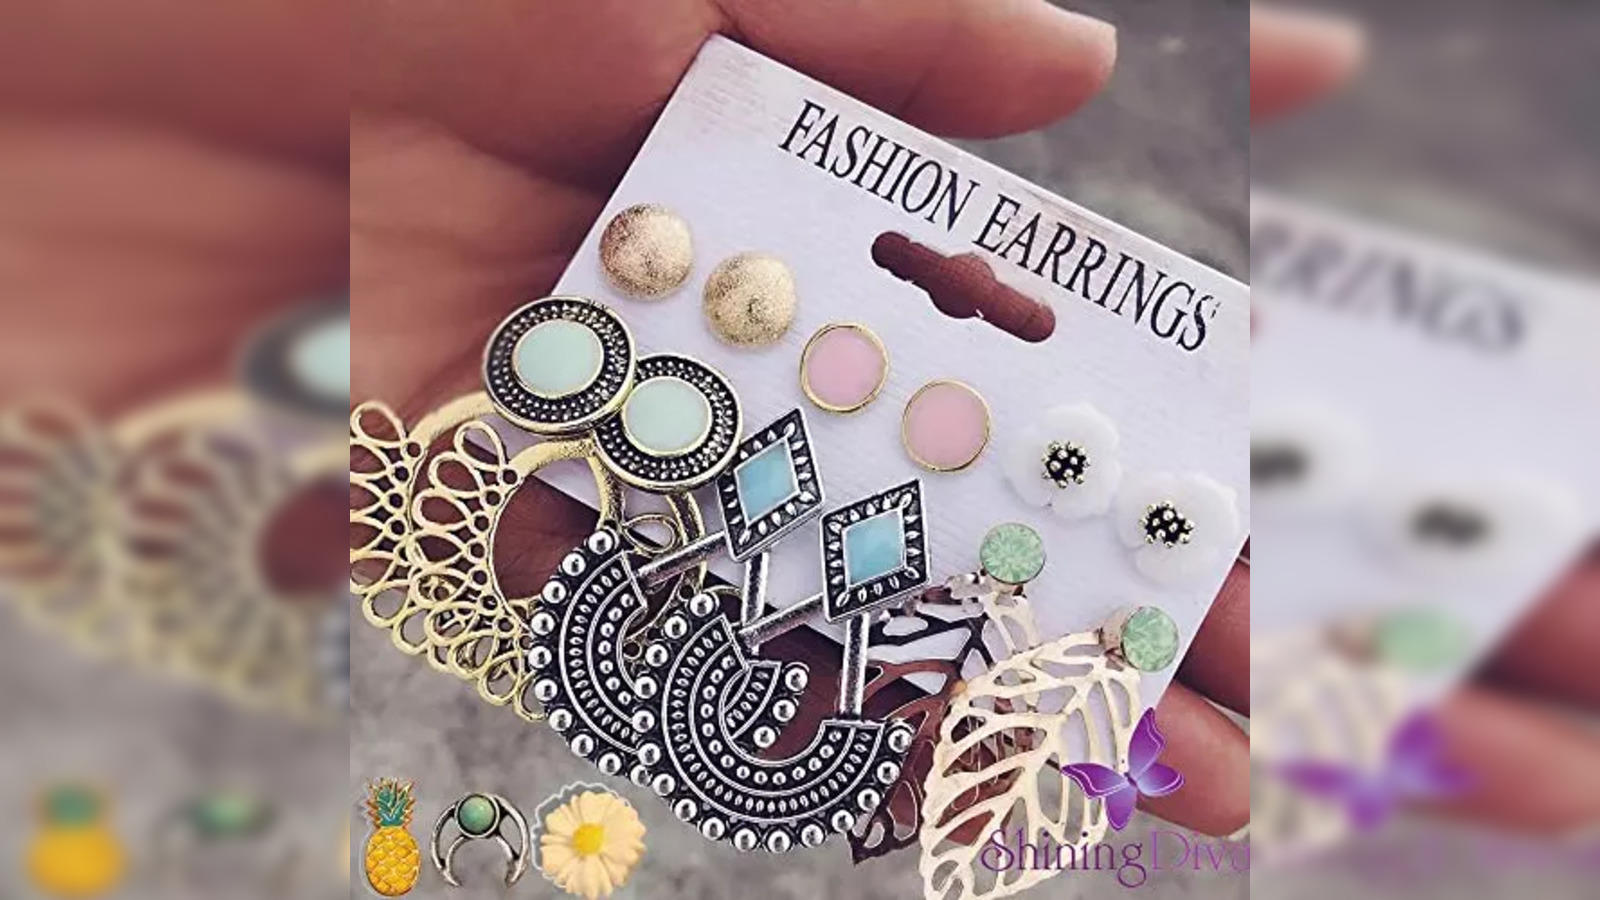 Best earring choices for your face shape!